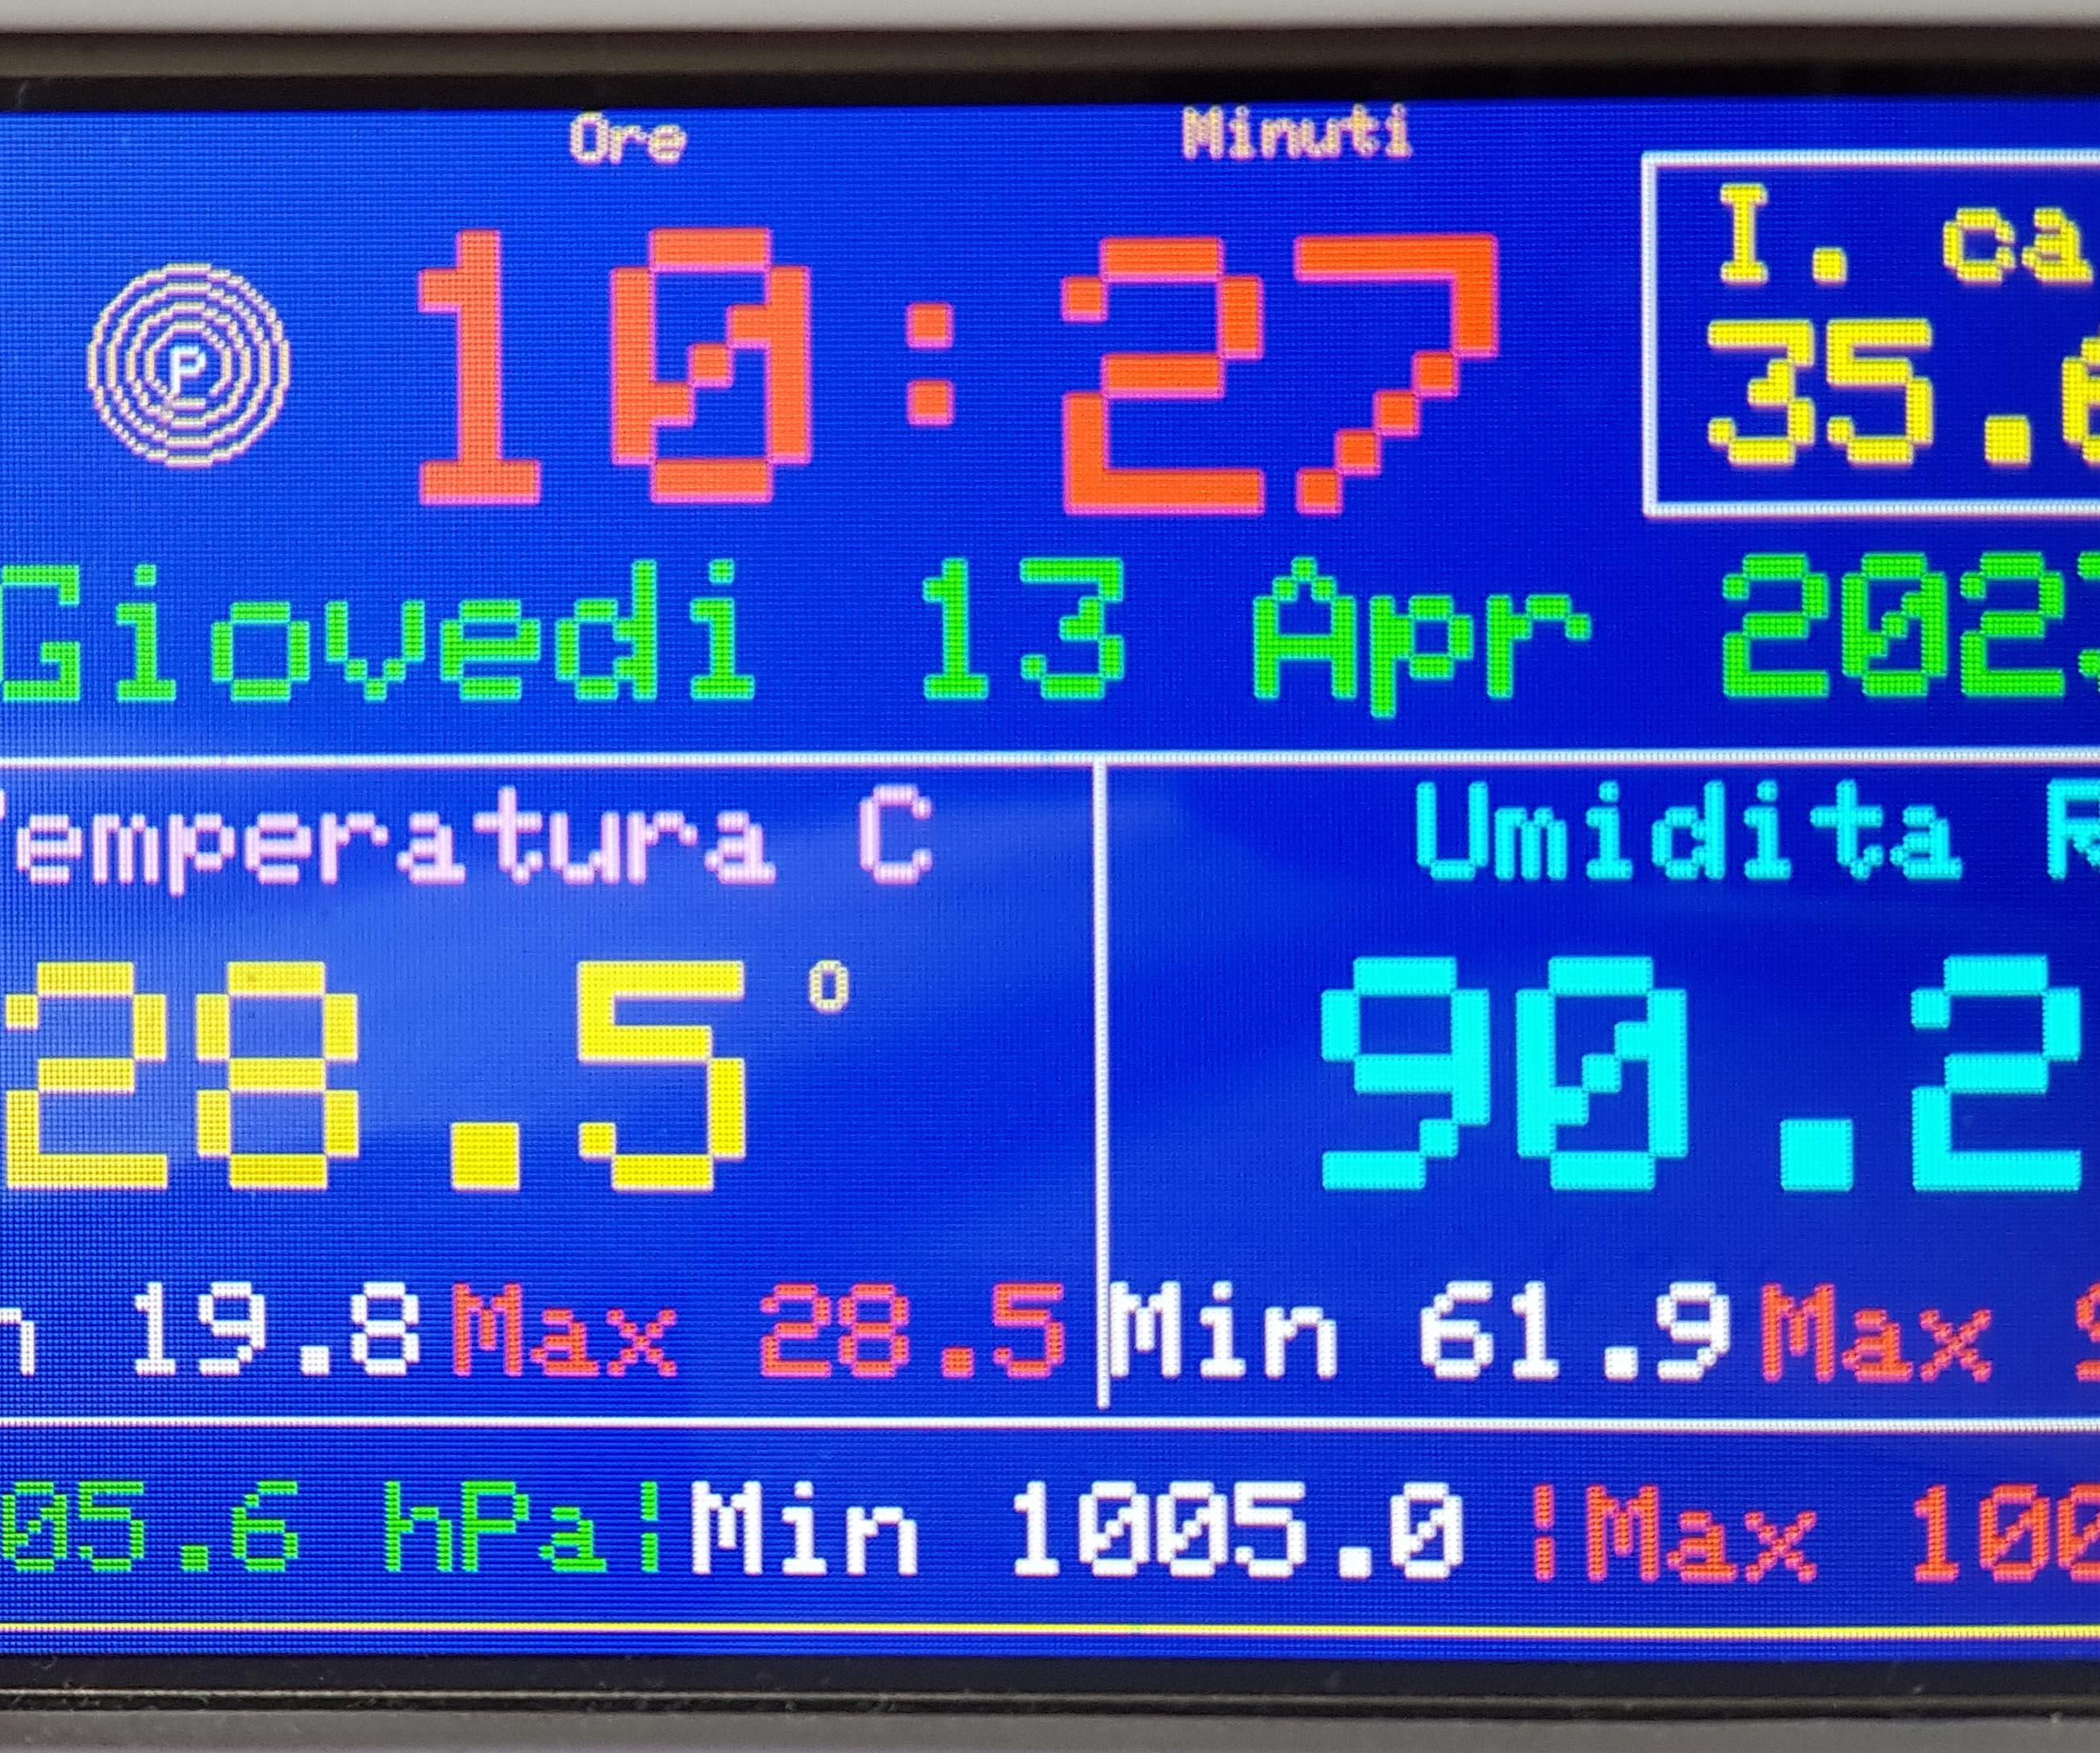 ILI9327 TFT, BME280, DS3231: Display Date, Time, Temp, Humidity and Pressure, Heat Index, DST, With Min and Max Values Saved on Micro SD.